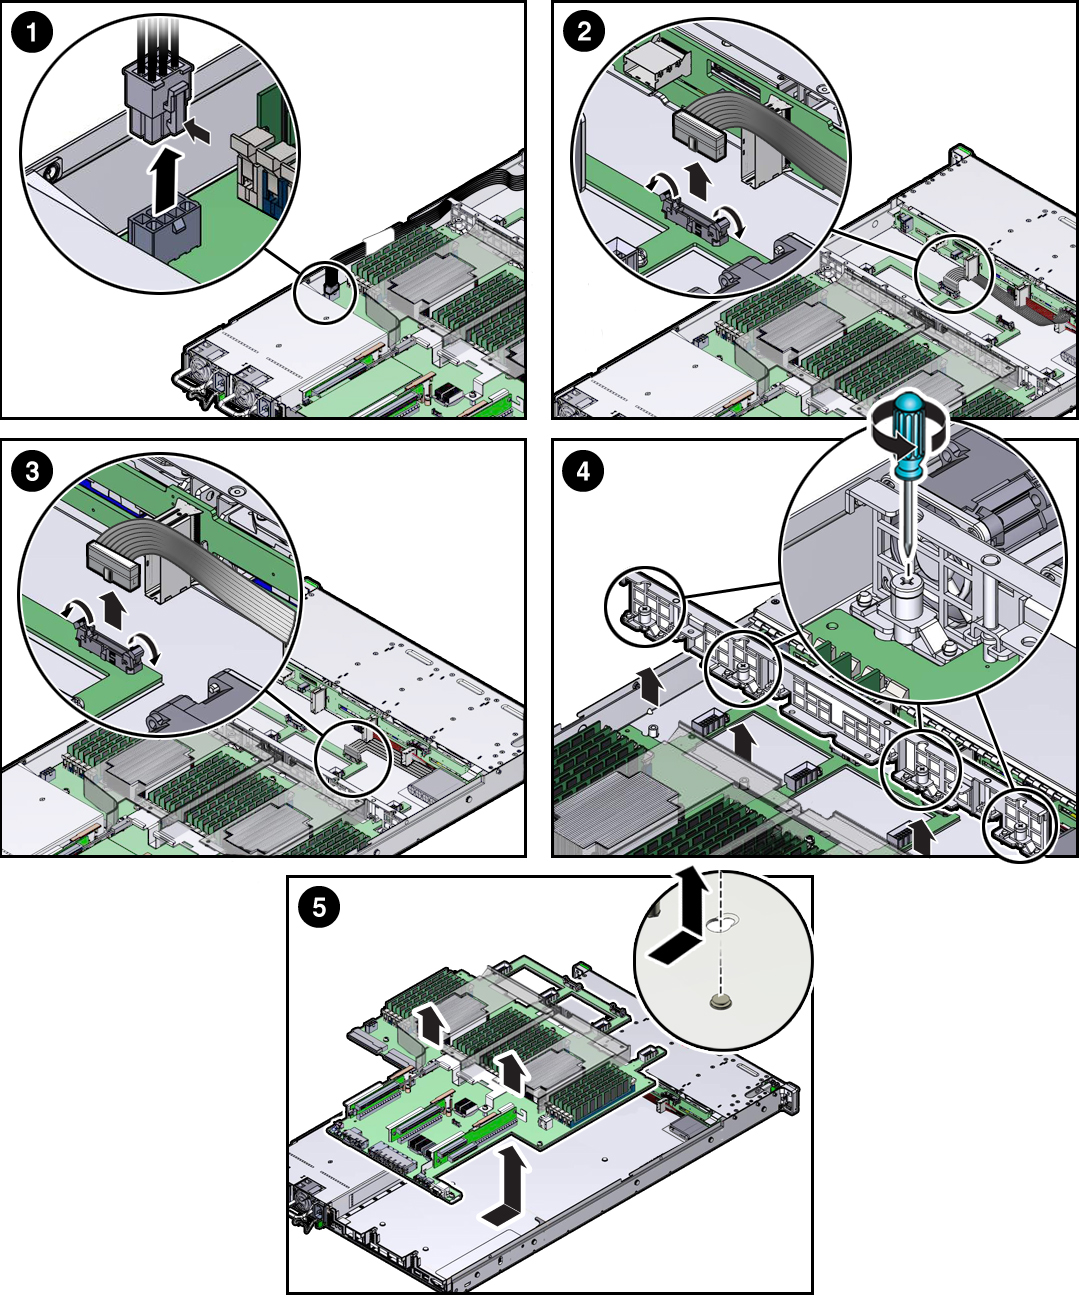 image:Figure showing how to remove the motherboard from the                                 controller.